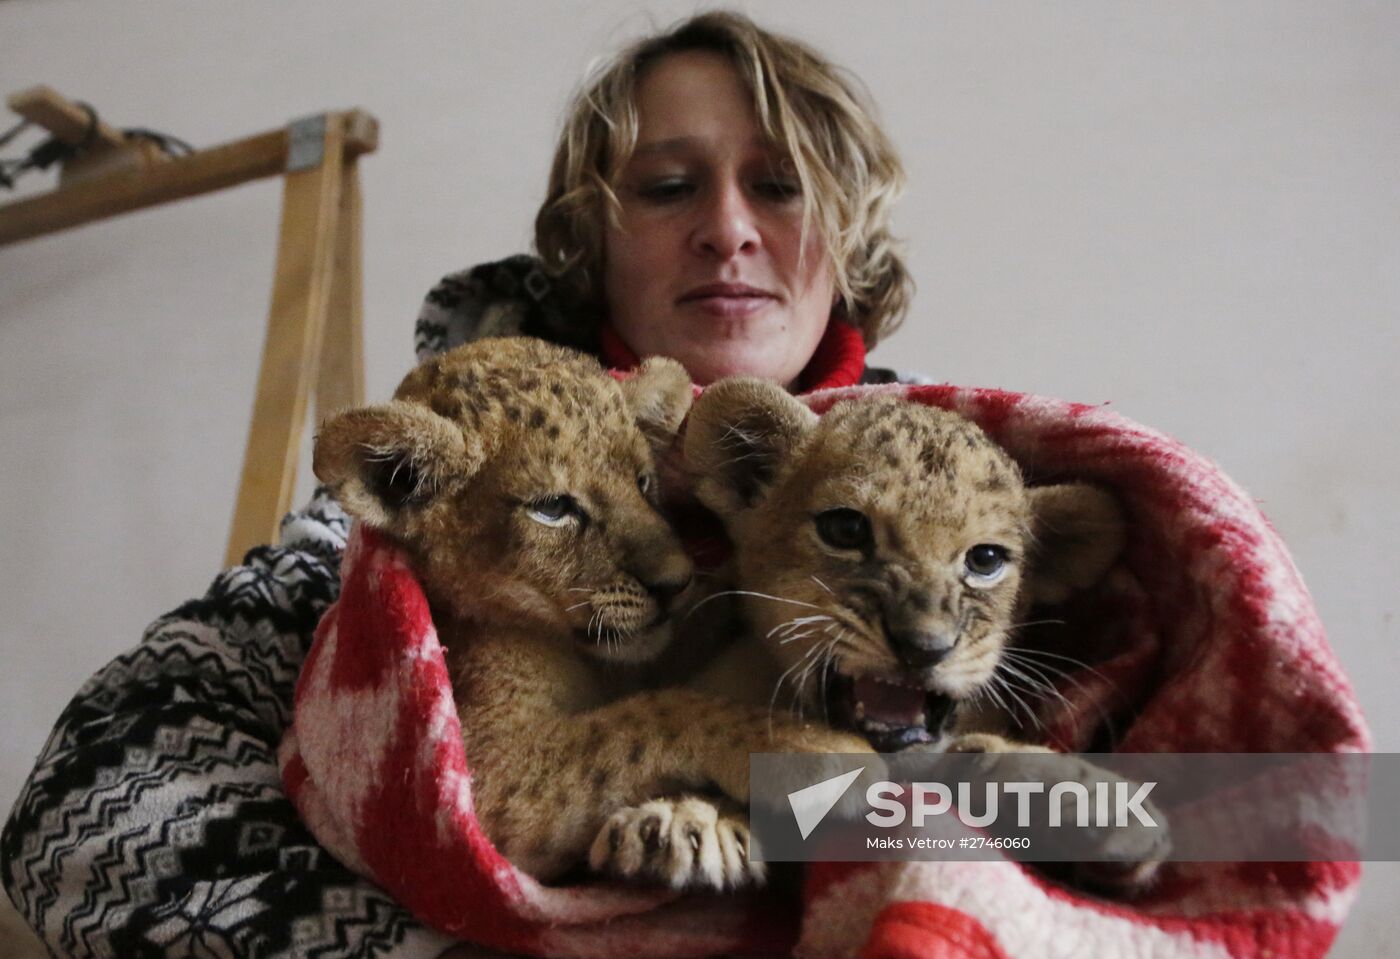 Lion cubs are covered with blankets to warm up at Safari Park Taigan in Crimea